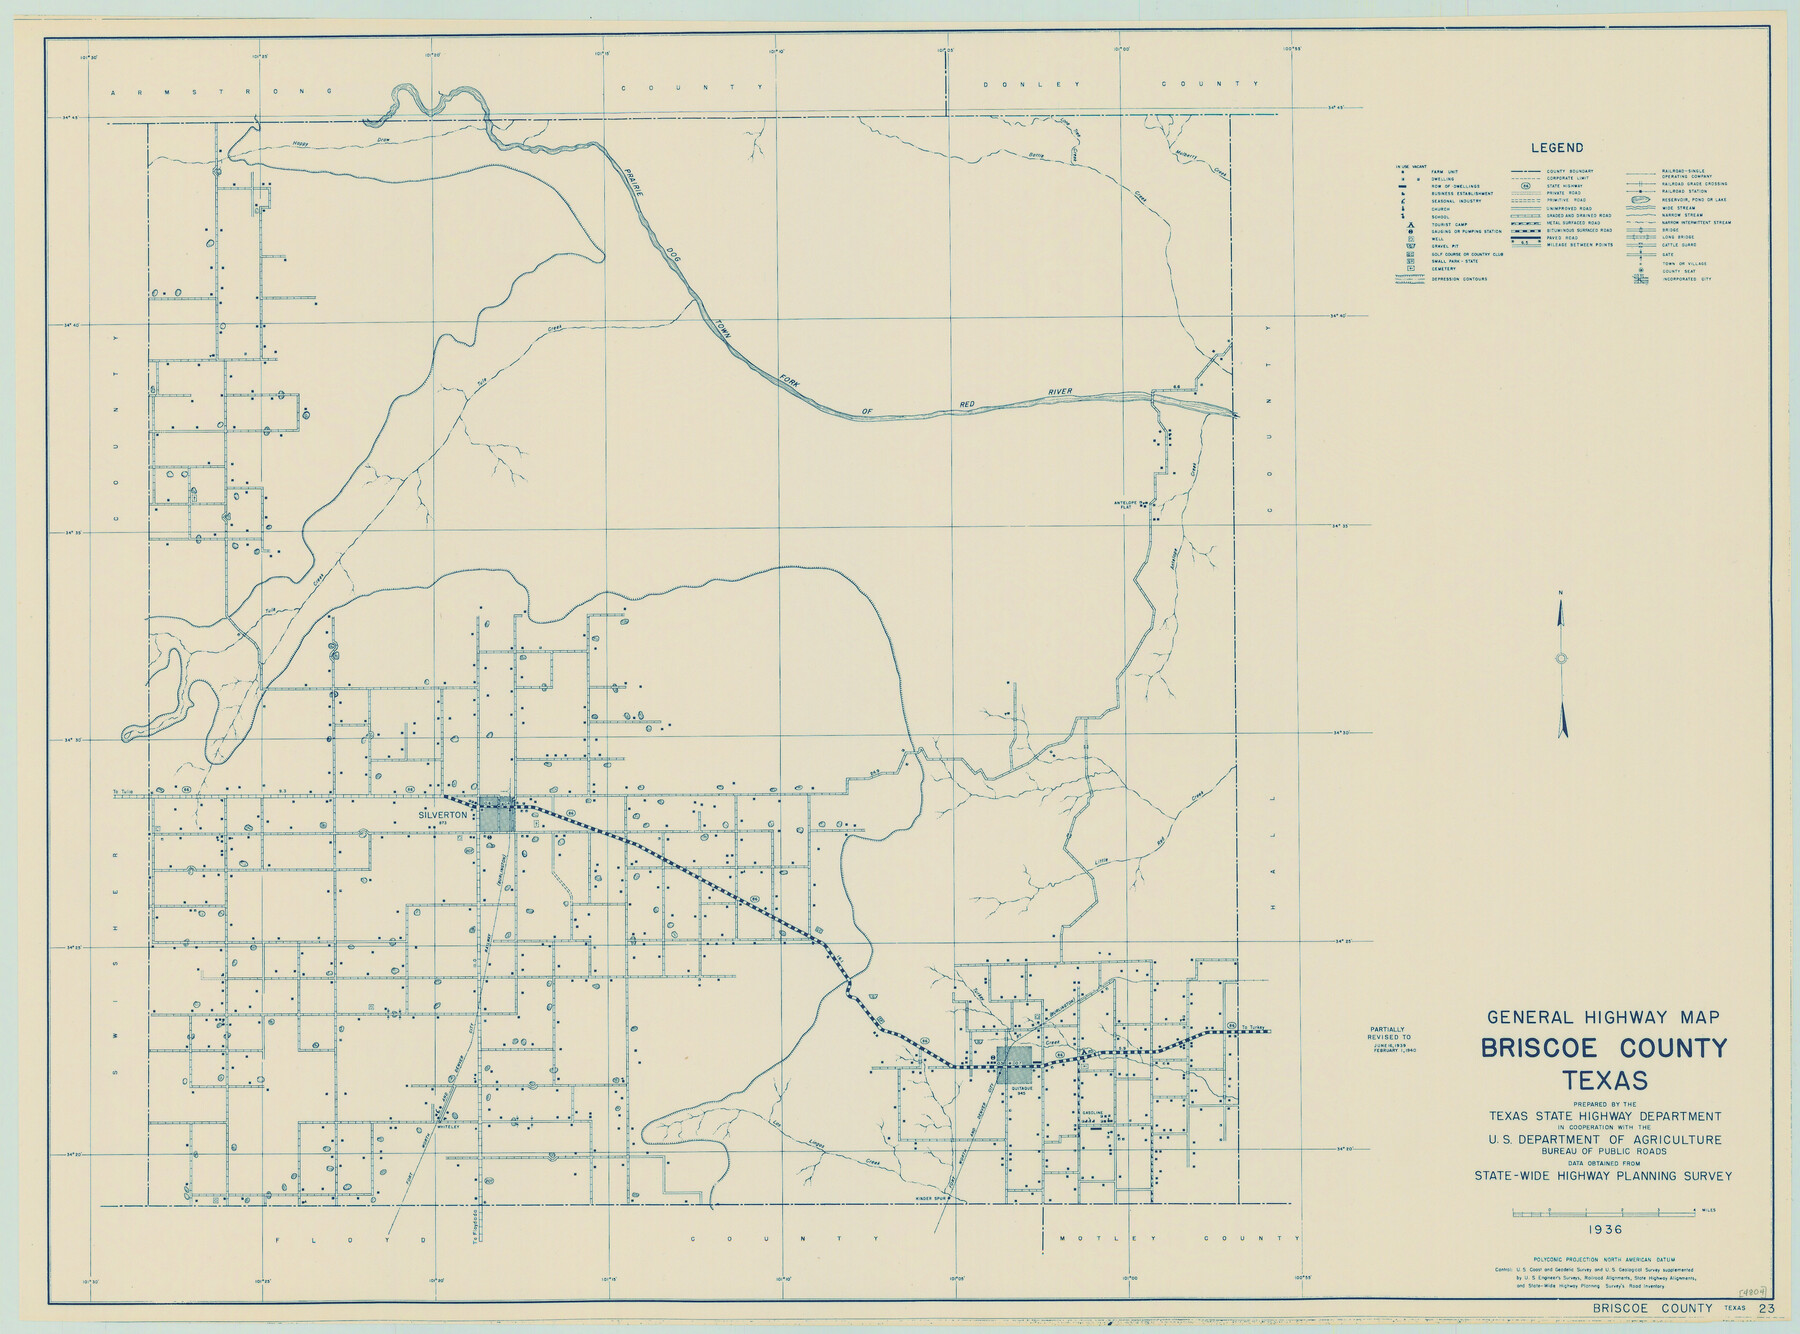 79029, General Highway Map, Briscoe County, Texas, Texas State Library and Archives